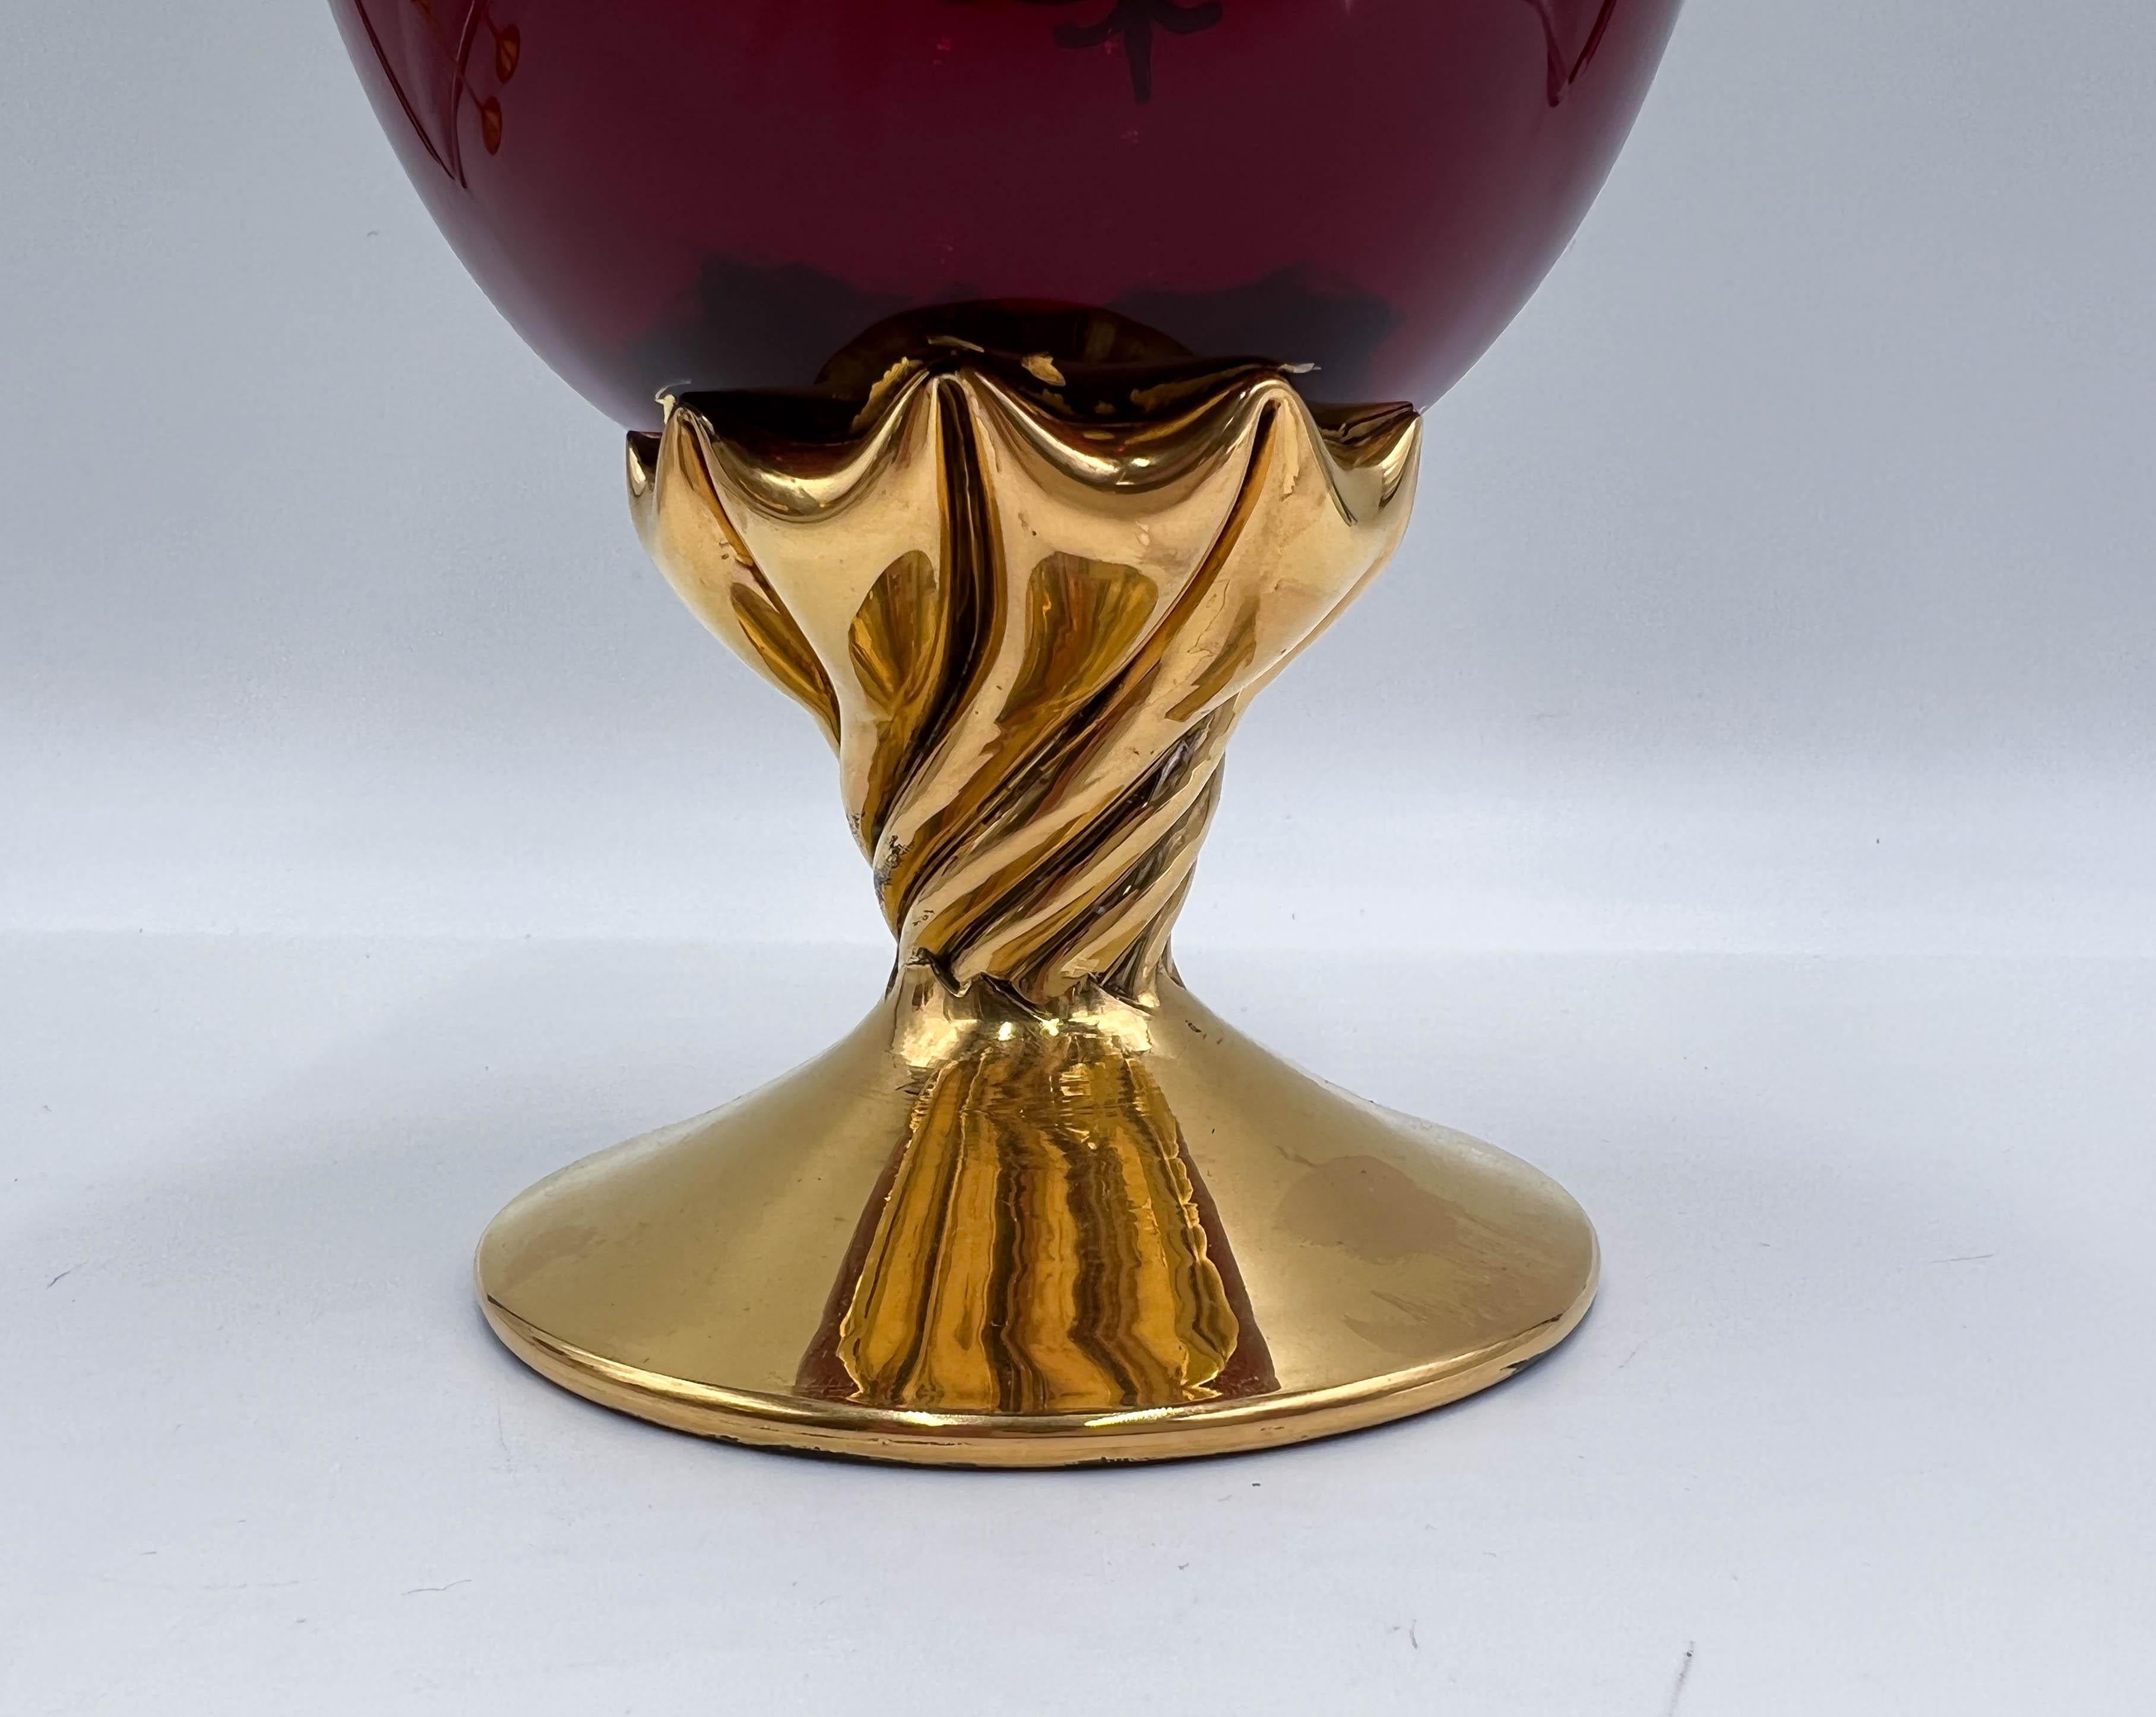 Vintage Tre Fuochi Venetian Murano Glass Ruby Red Goblets and Pitcher, 8 Pc Set For Sale 5